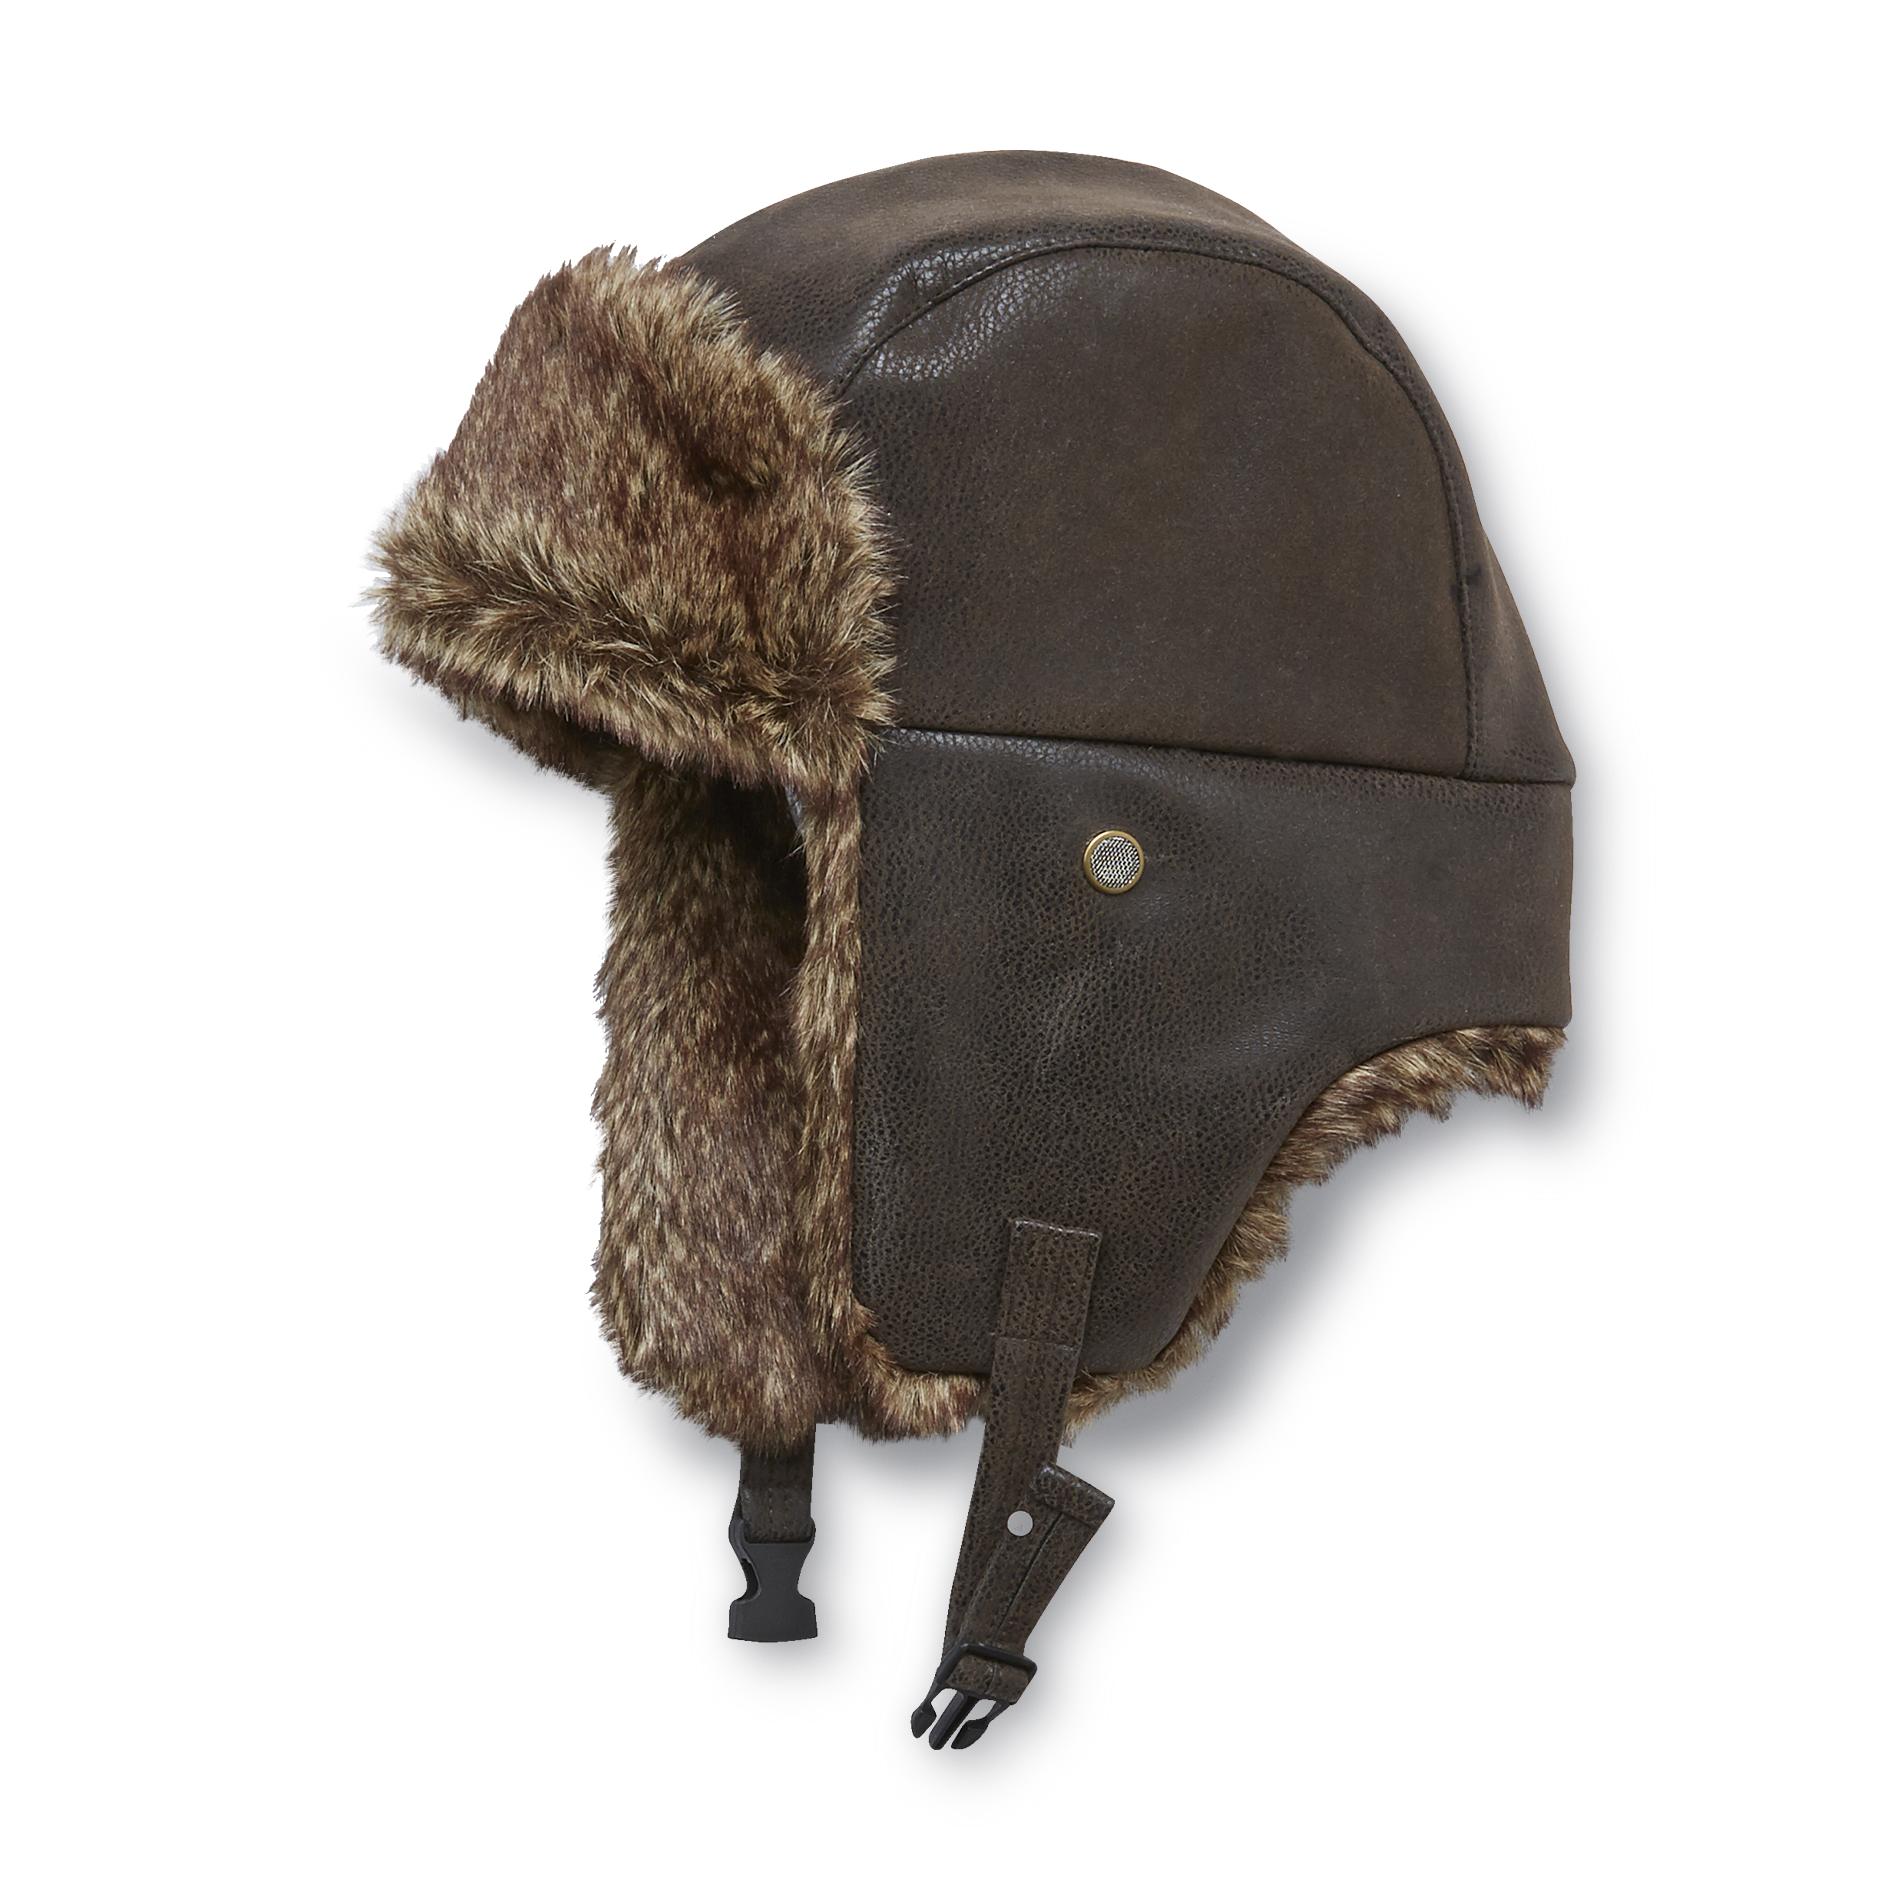 Route 66 Men's Simulated Leather Winter Trapper Hat